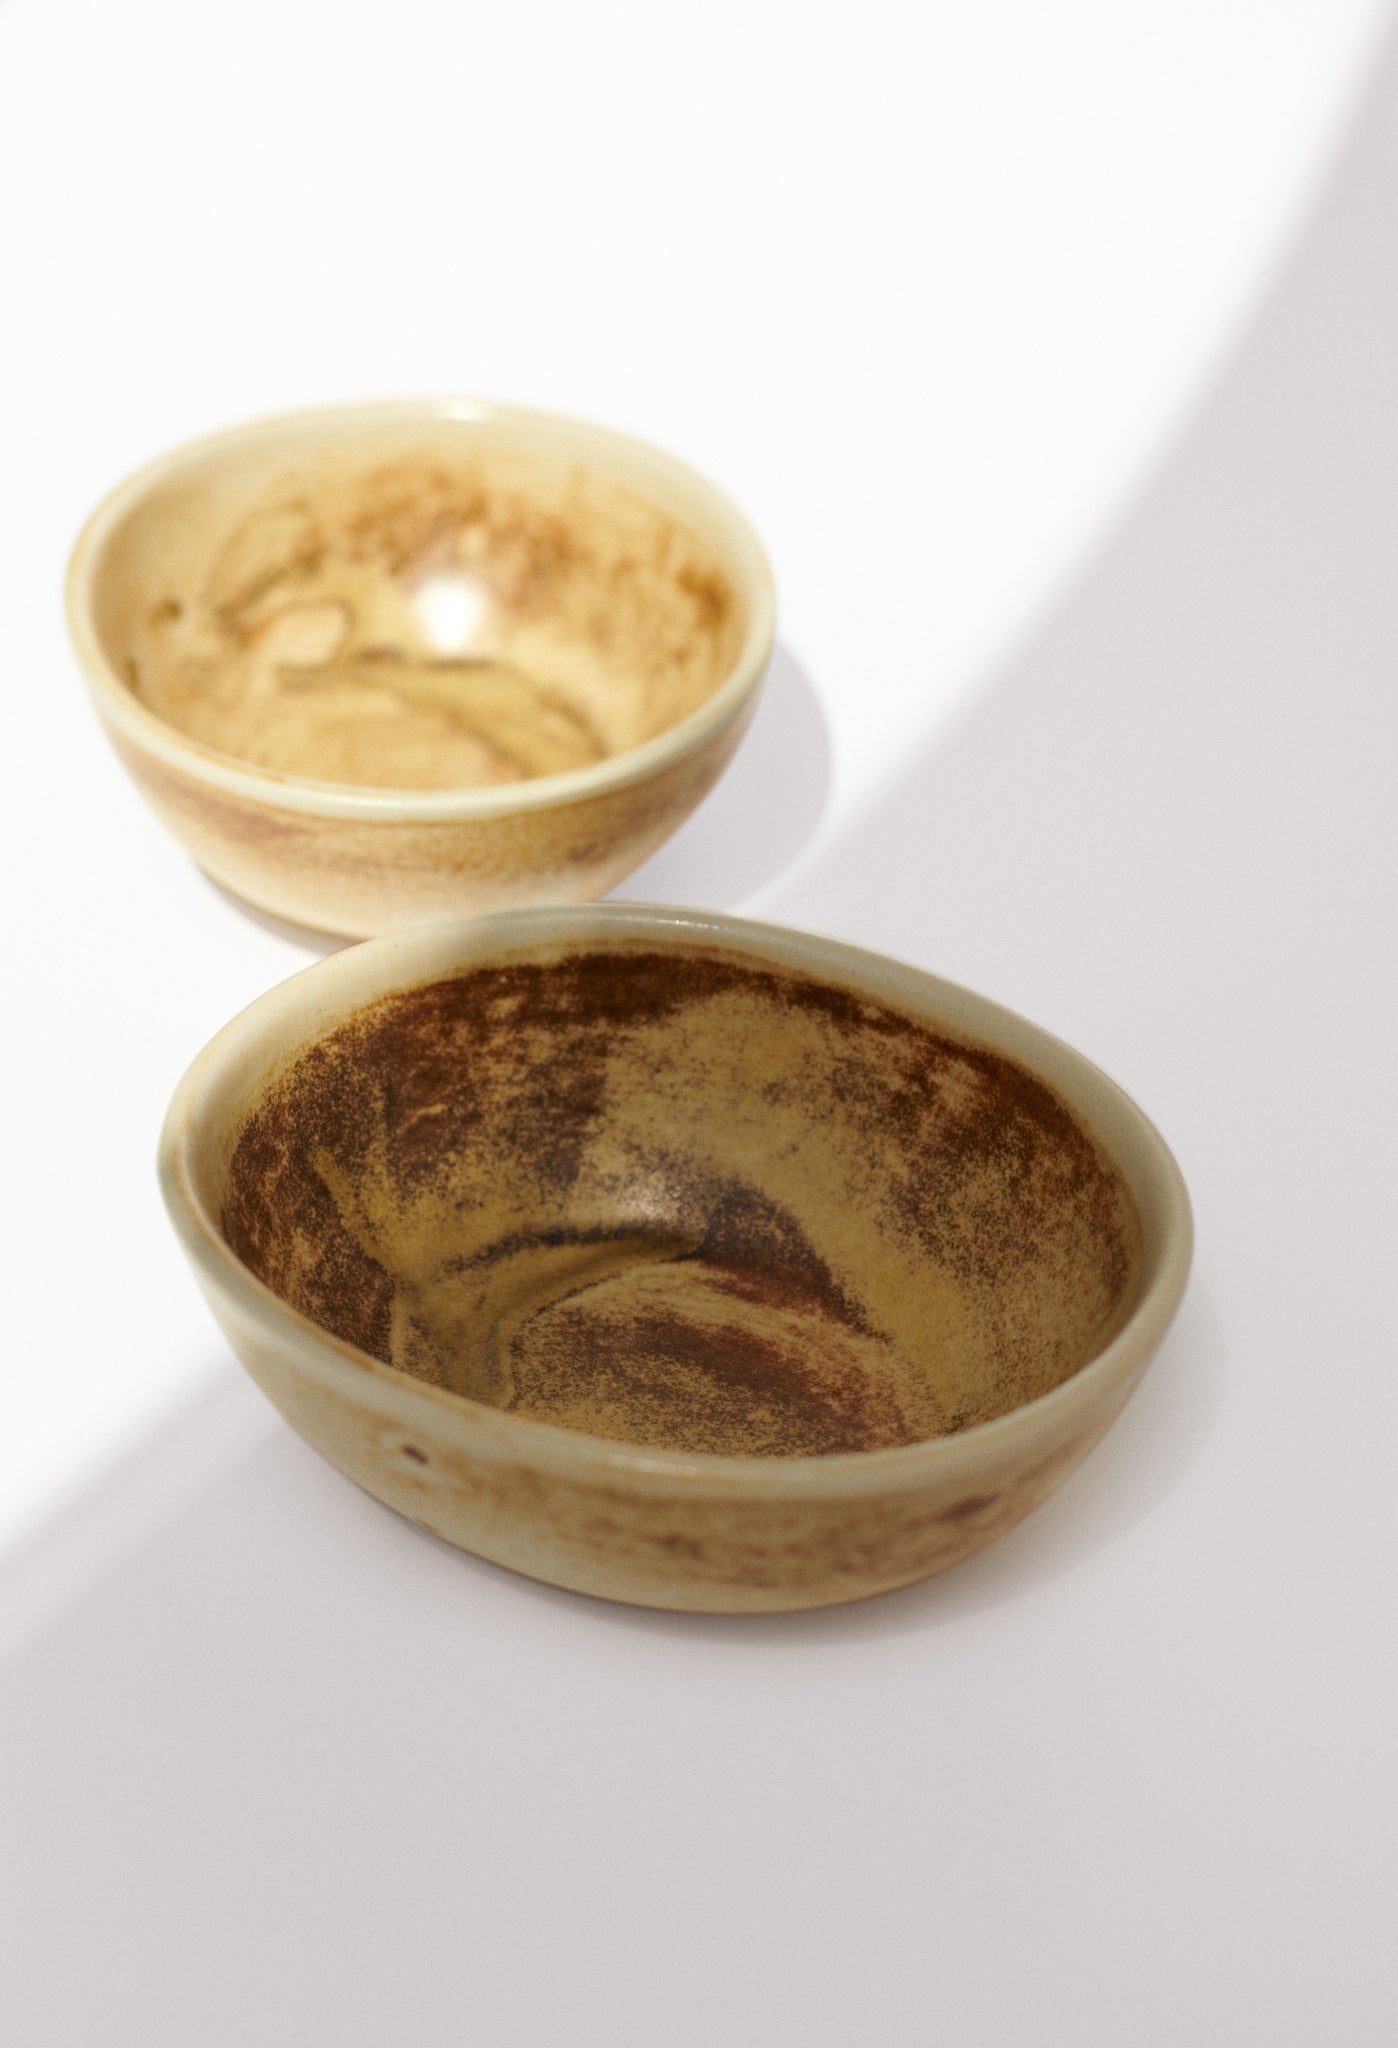 Set of 2 bowls for ice cream